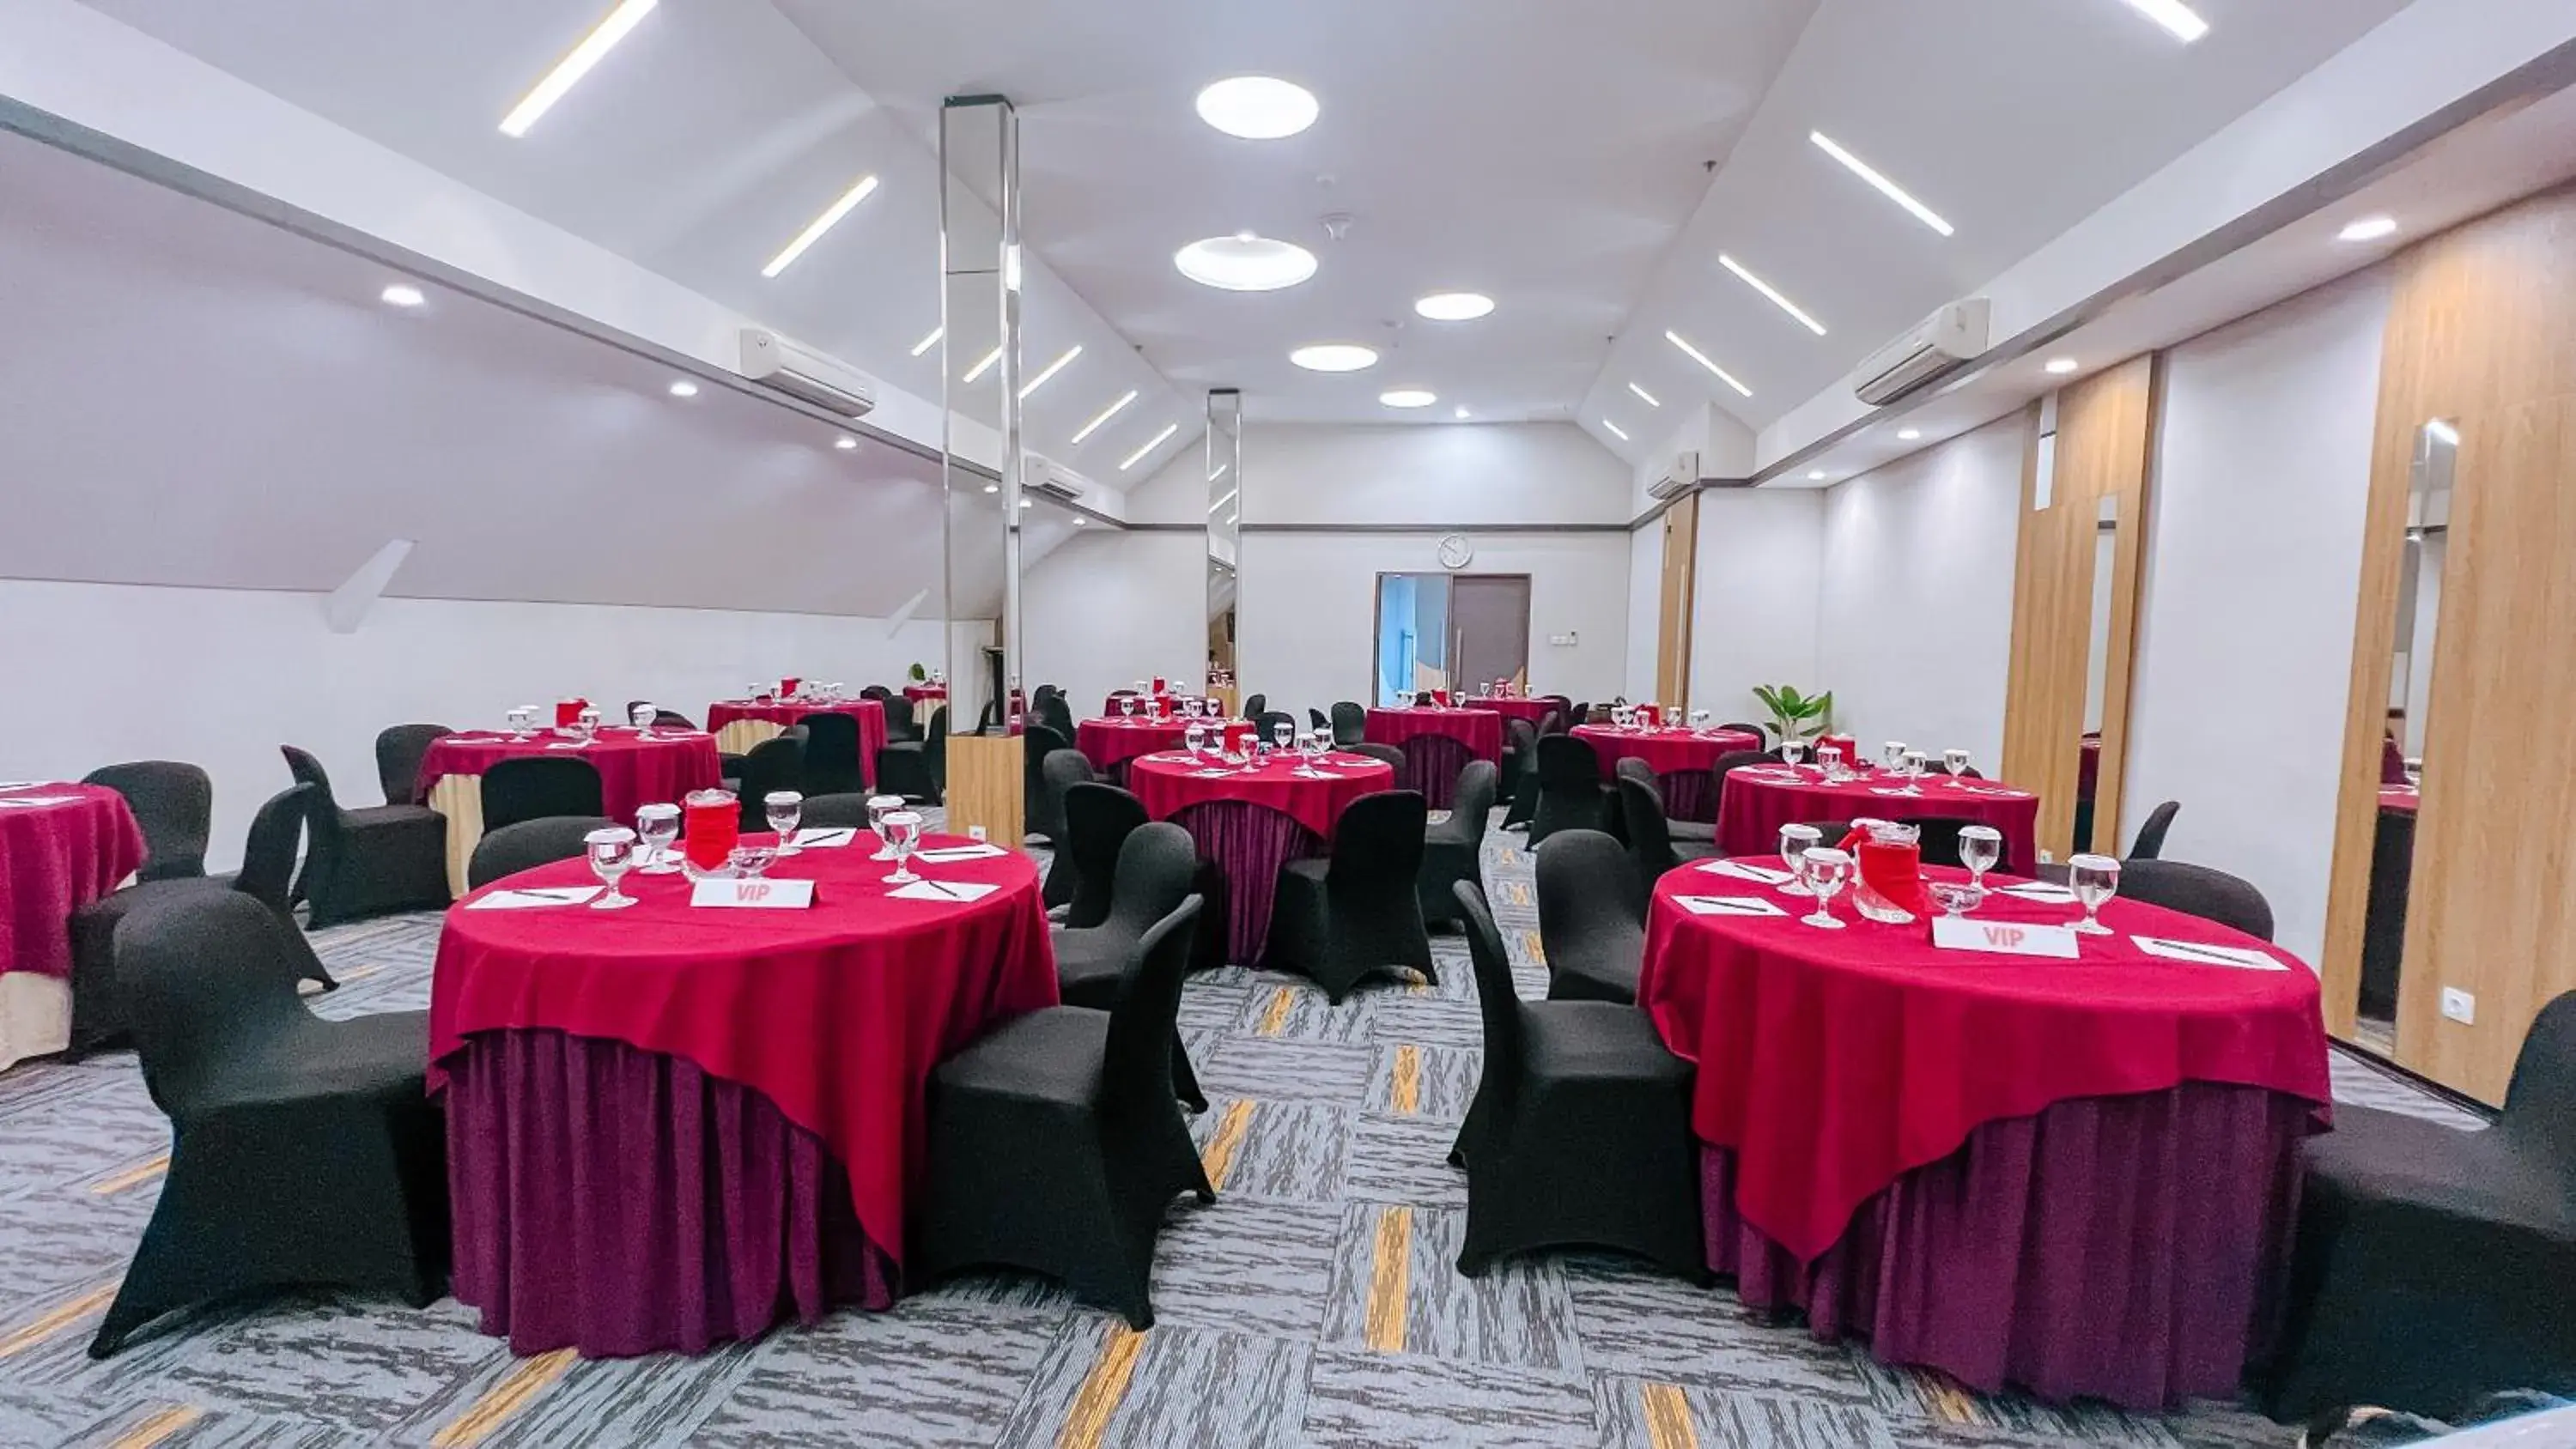 Meeting/conference room, Banquet Facilities in J4 Hotels Legian